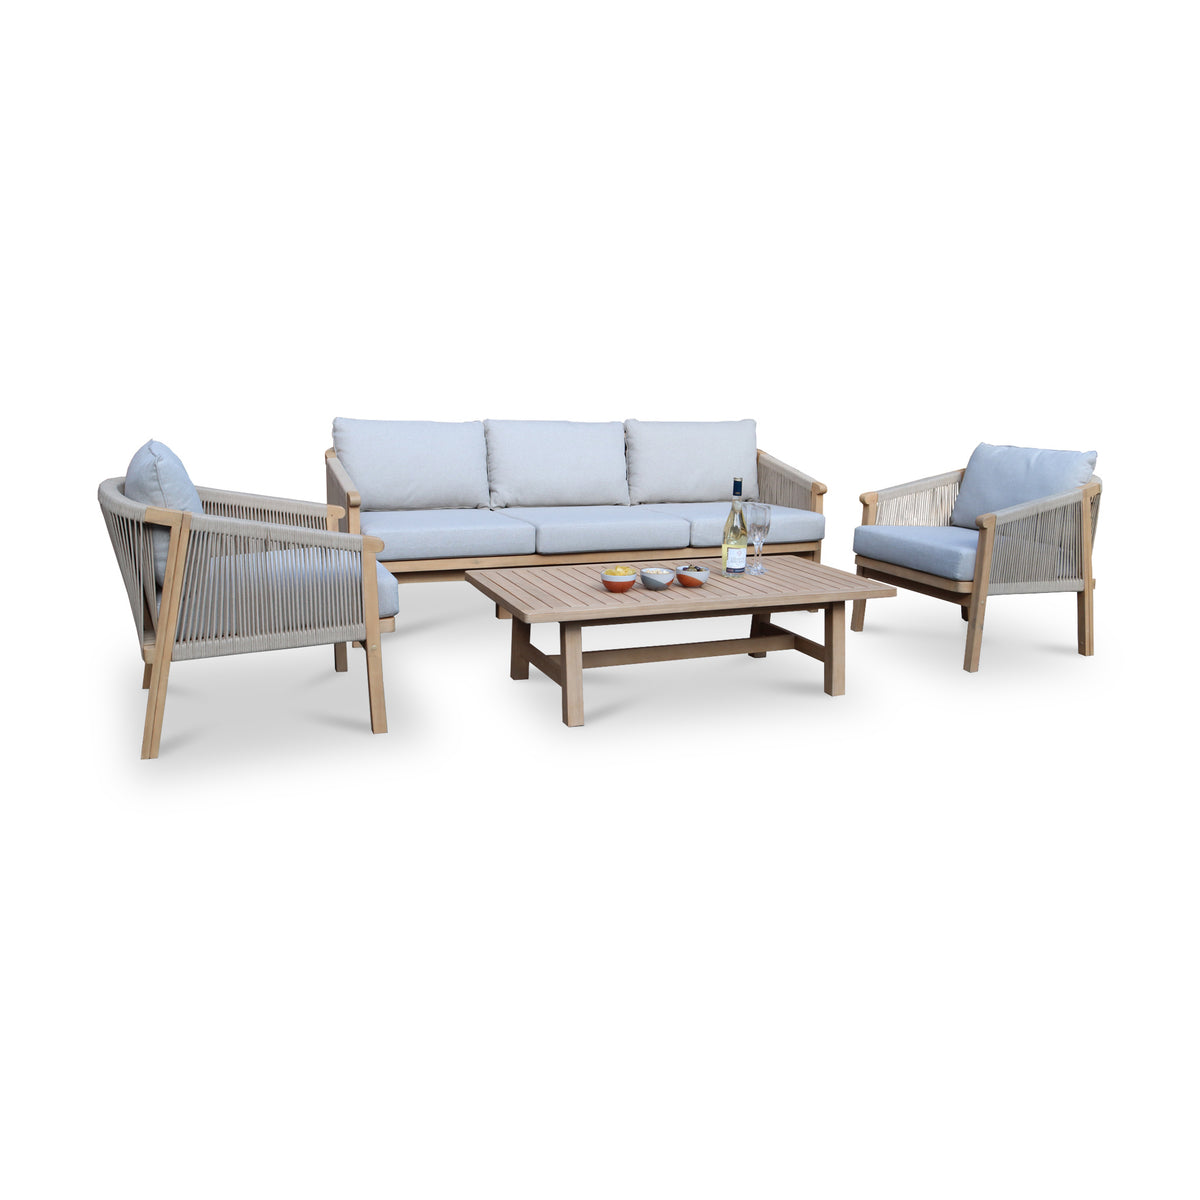 Roma FSC 5 Seater Triple Lounge Set from Roseland Furniture